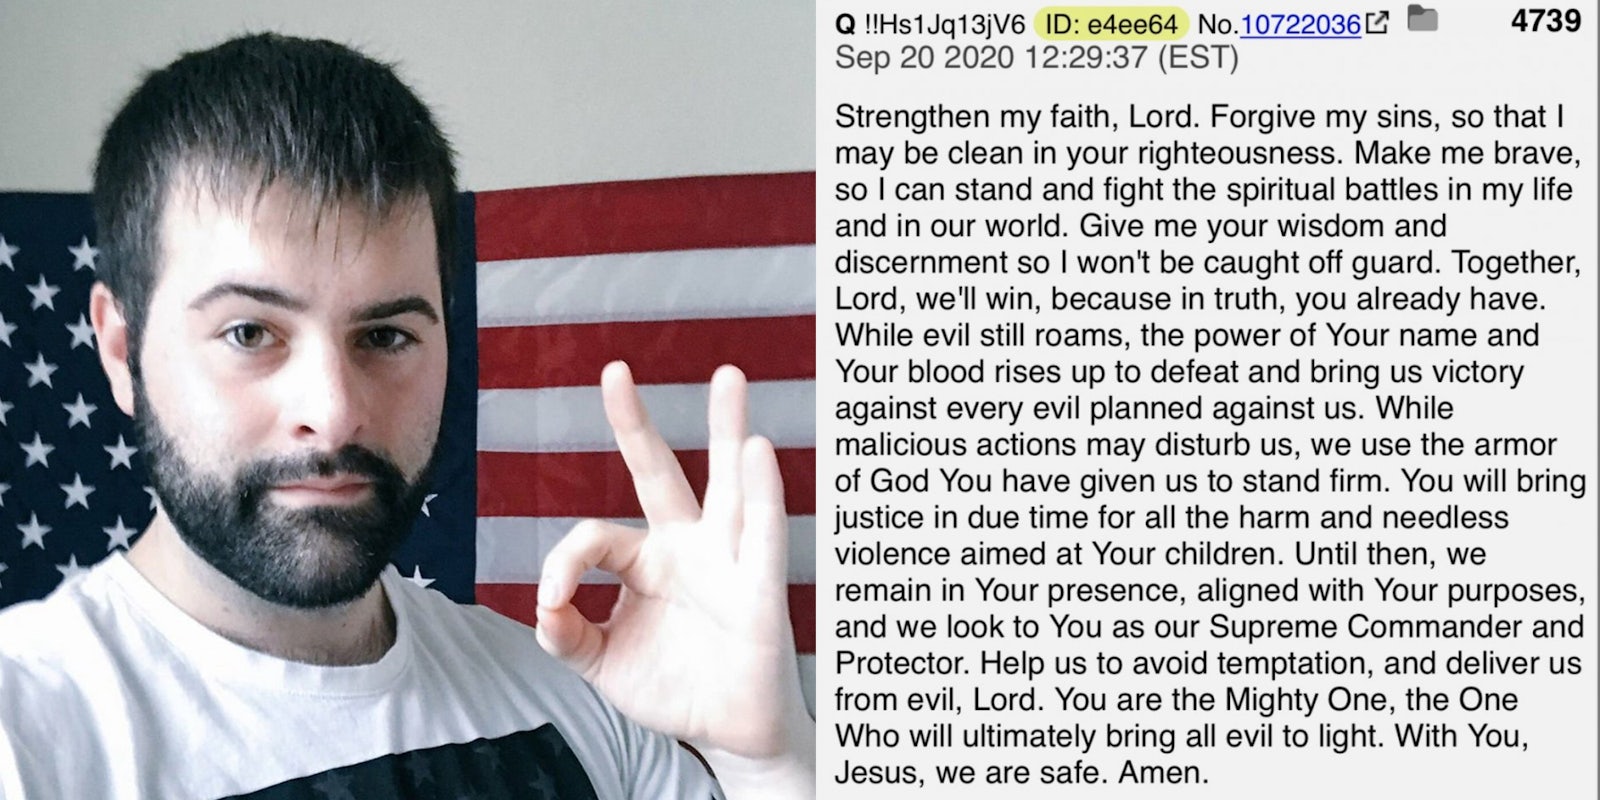 andrew torba gab ceo gives white supremacist hand sign with qanon rant